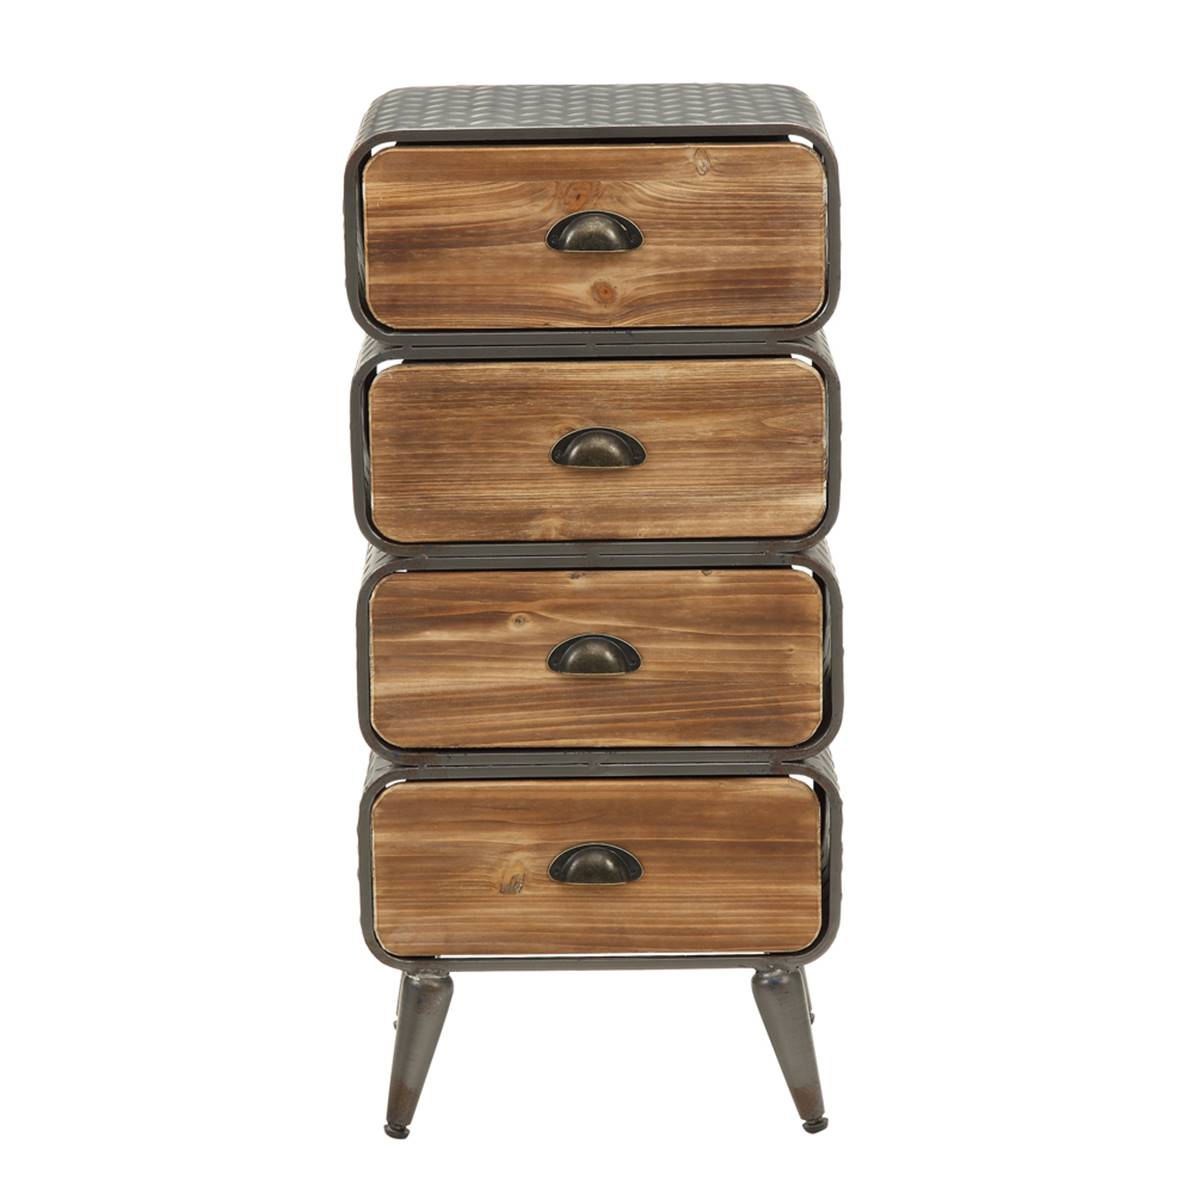 4D Concepts Urban Loft 4 Rounded Drawer Chest